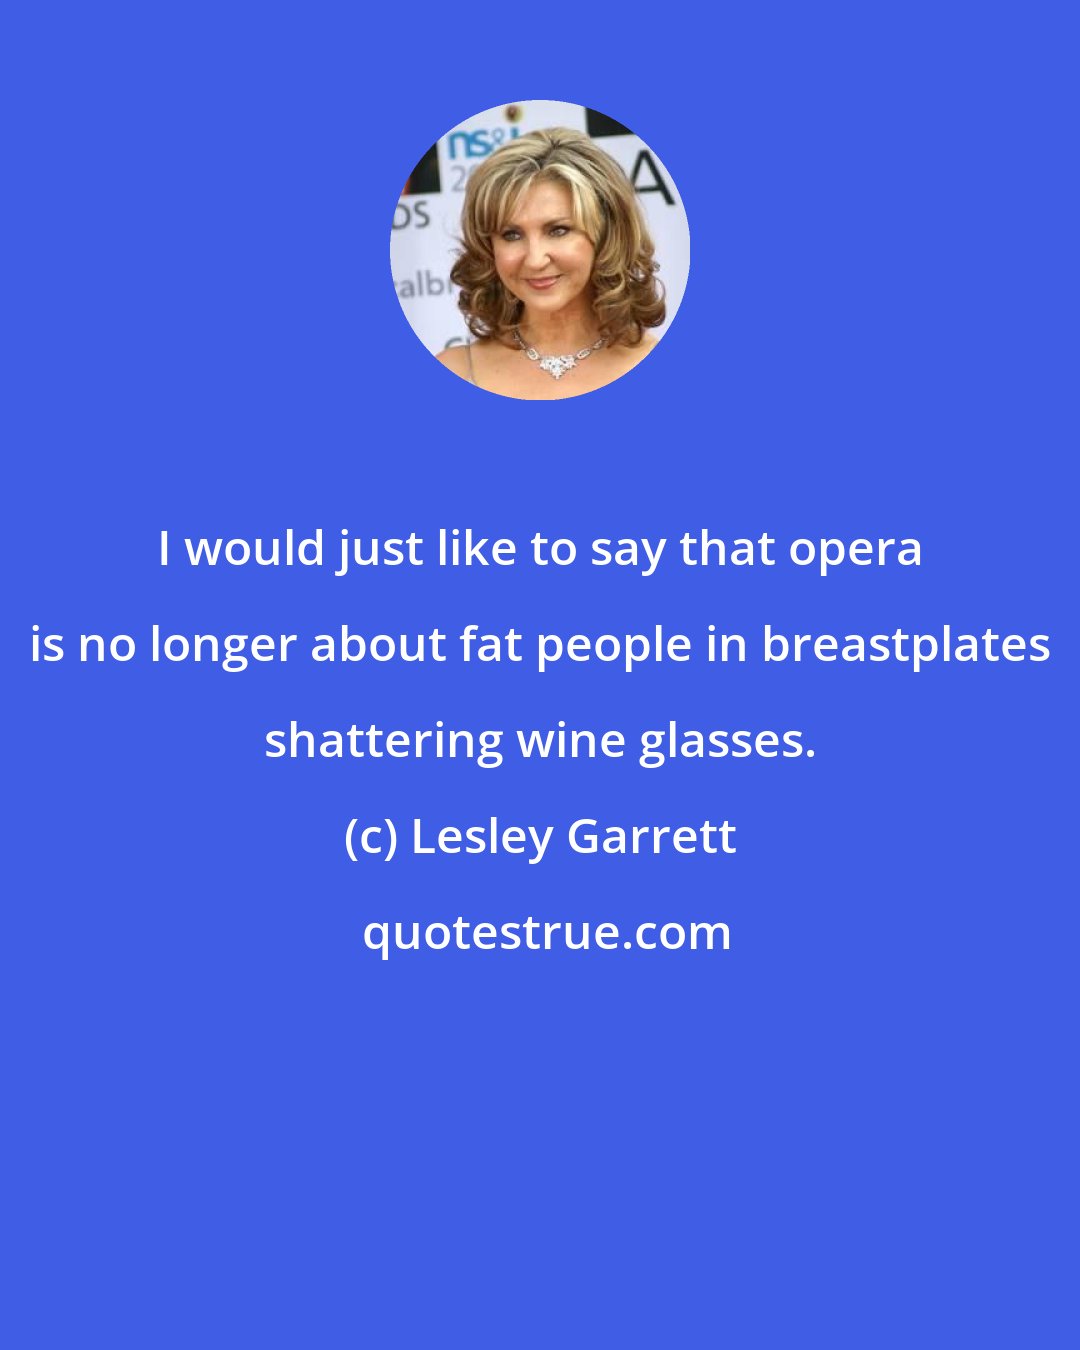 Lesley Garrett: I would just like to say that opera is no longer about fat people in breastplates shattering wine glasses.